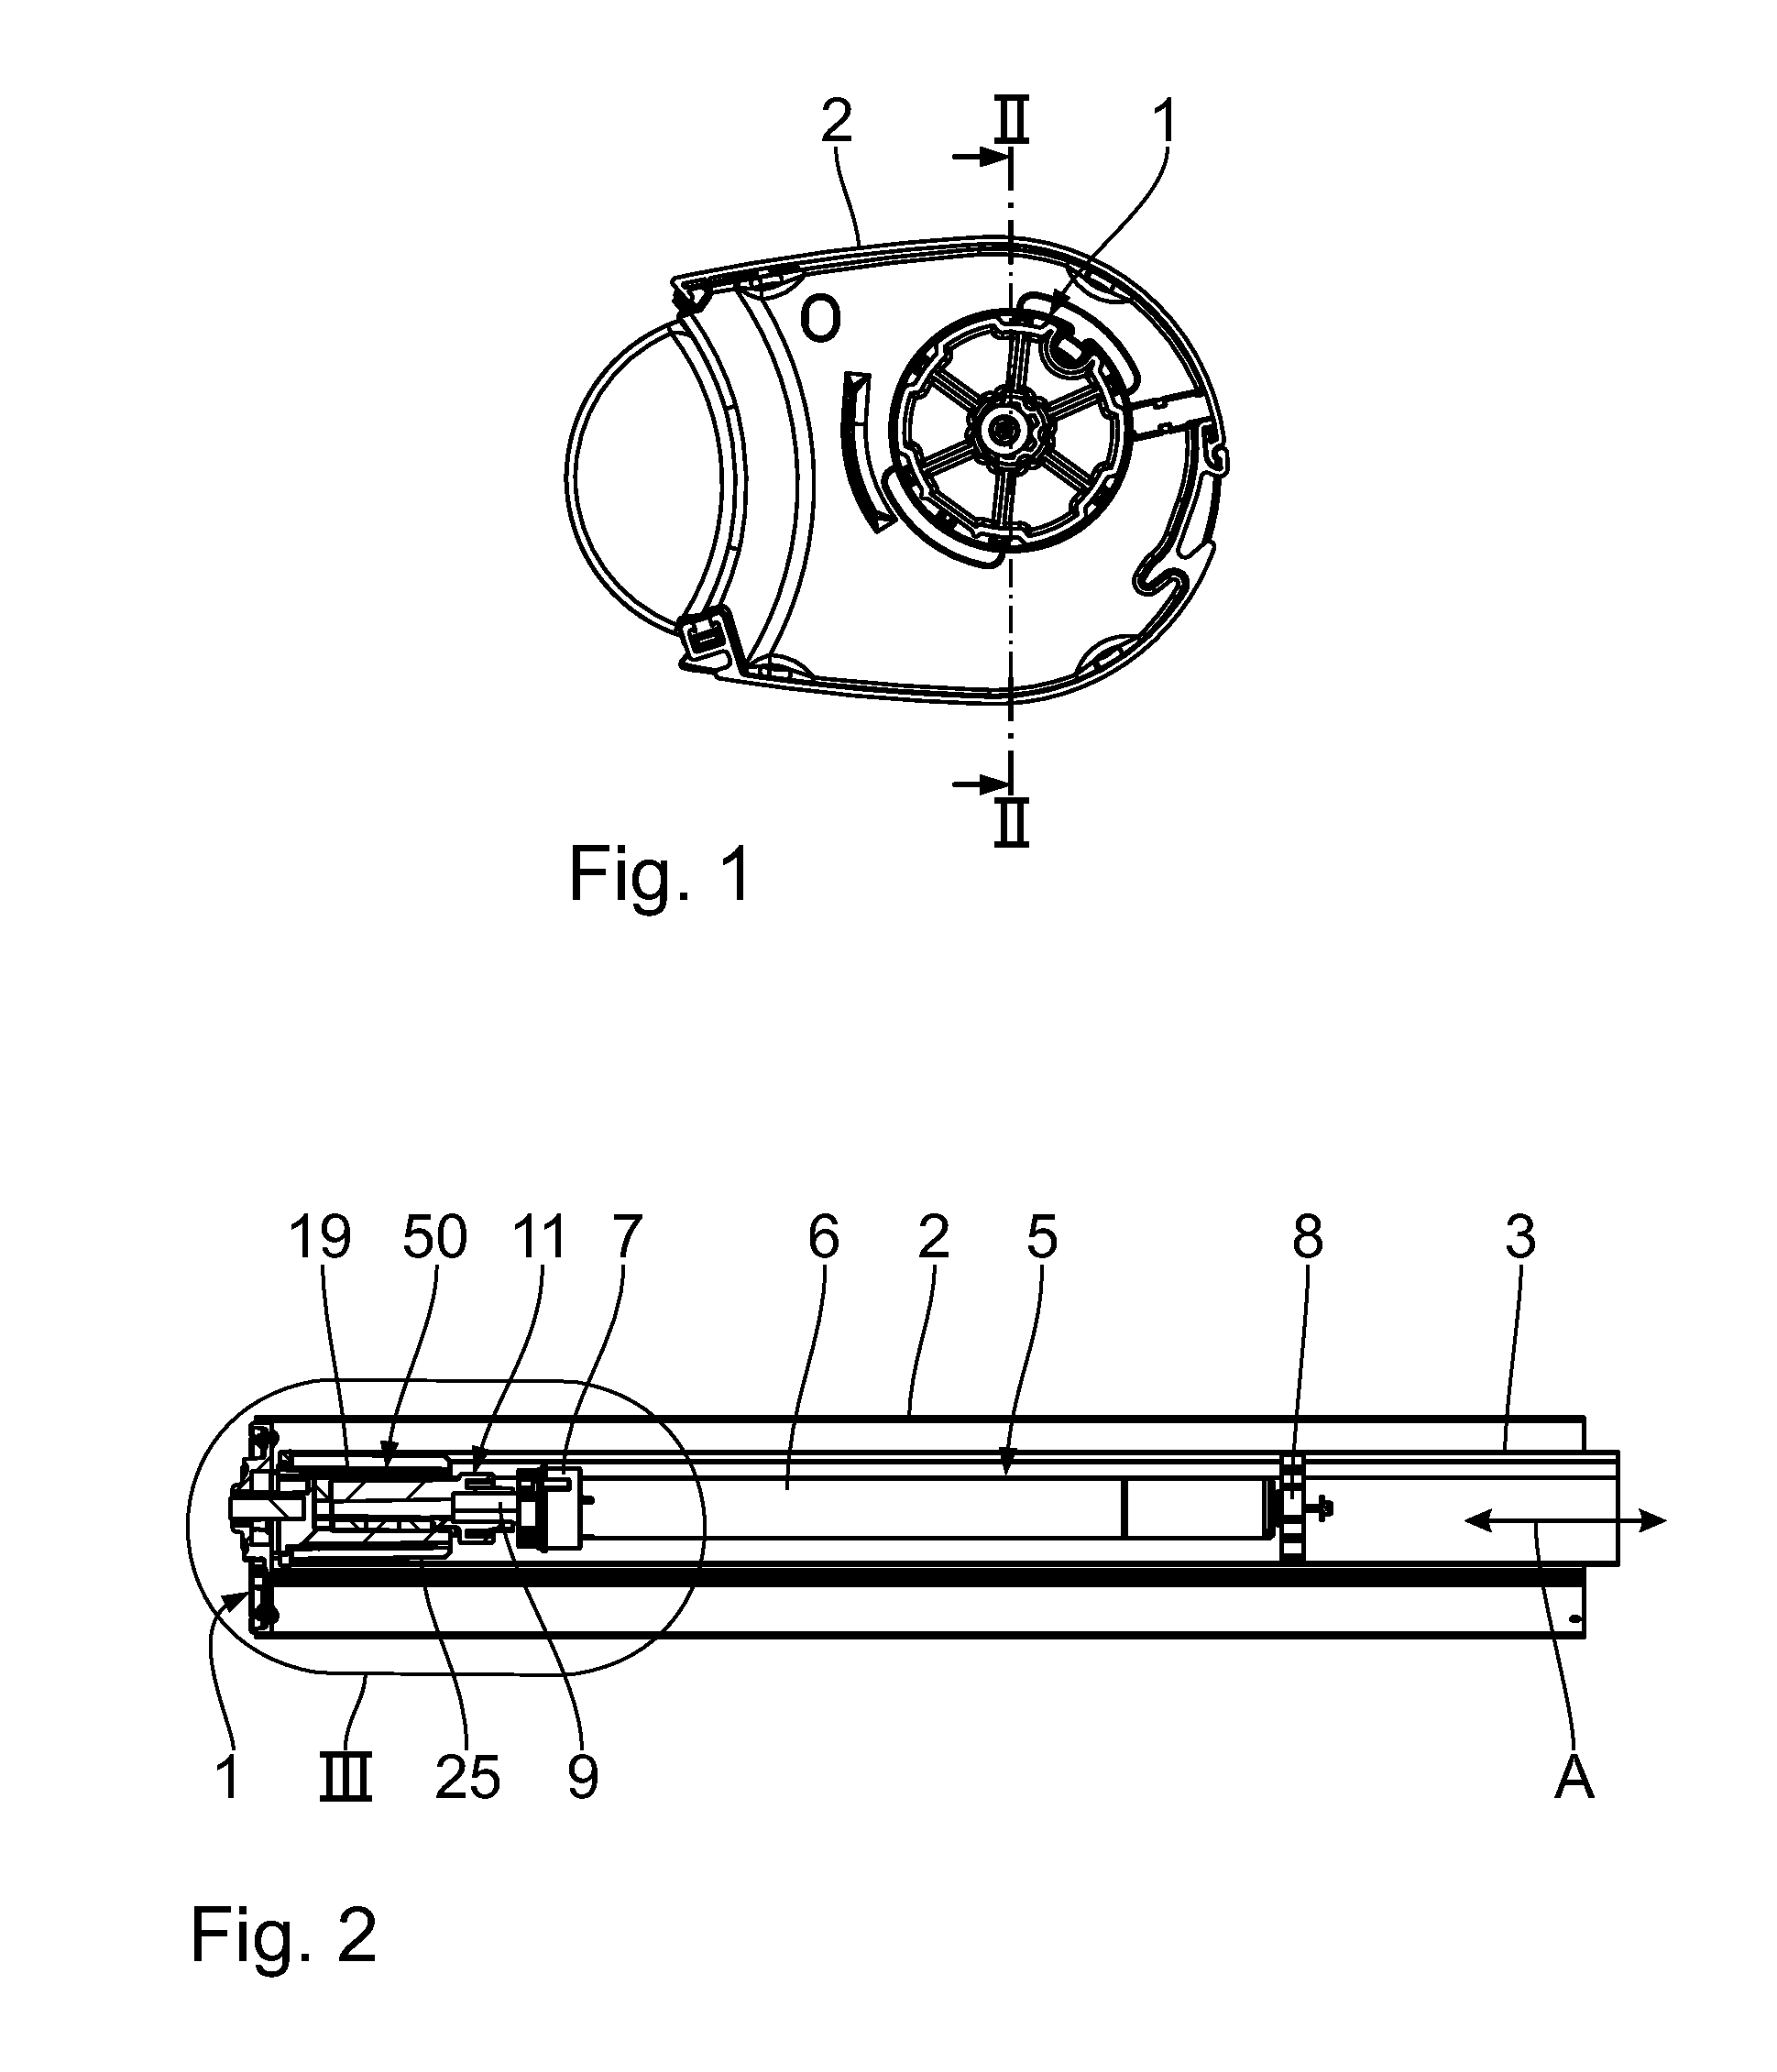 Awning comprising a vibration-damped drive